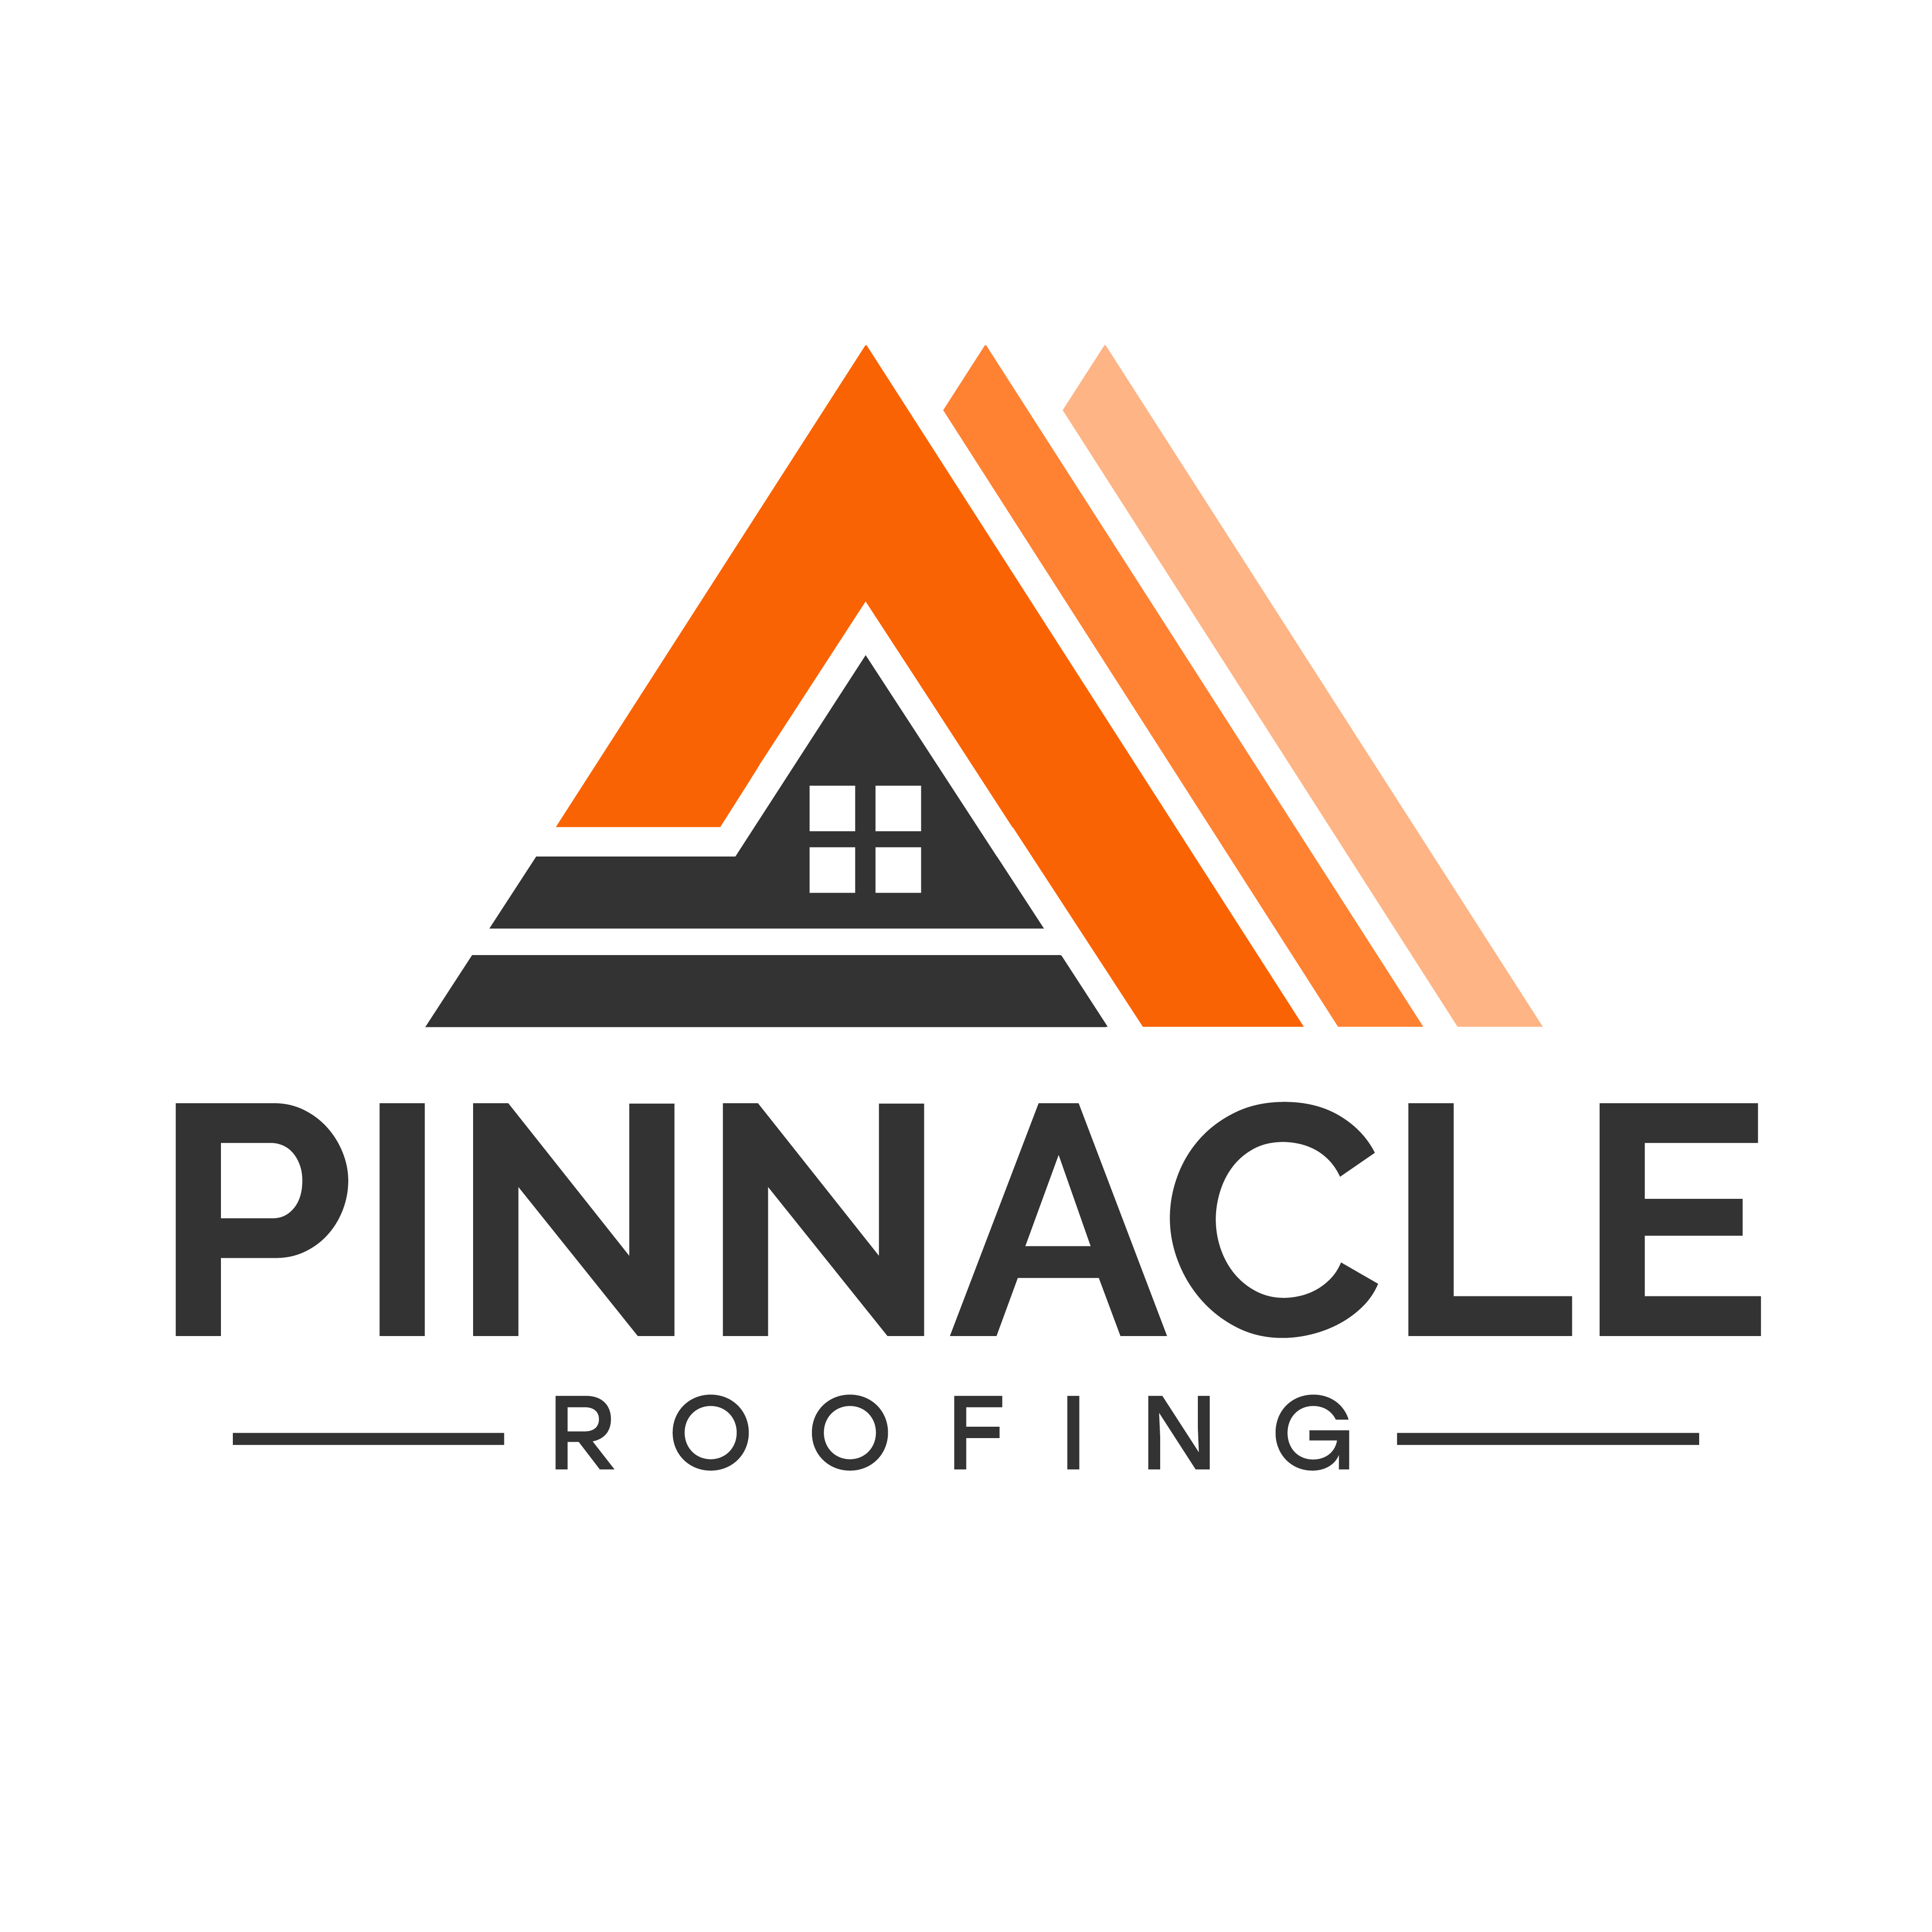 Pinnacle Roofing Company Is Now One Of the Best Roofing Companies in Lakewood, CO